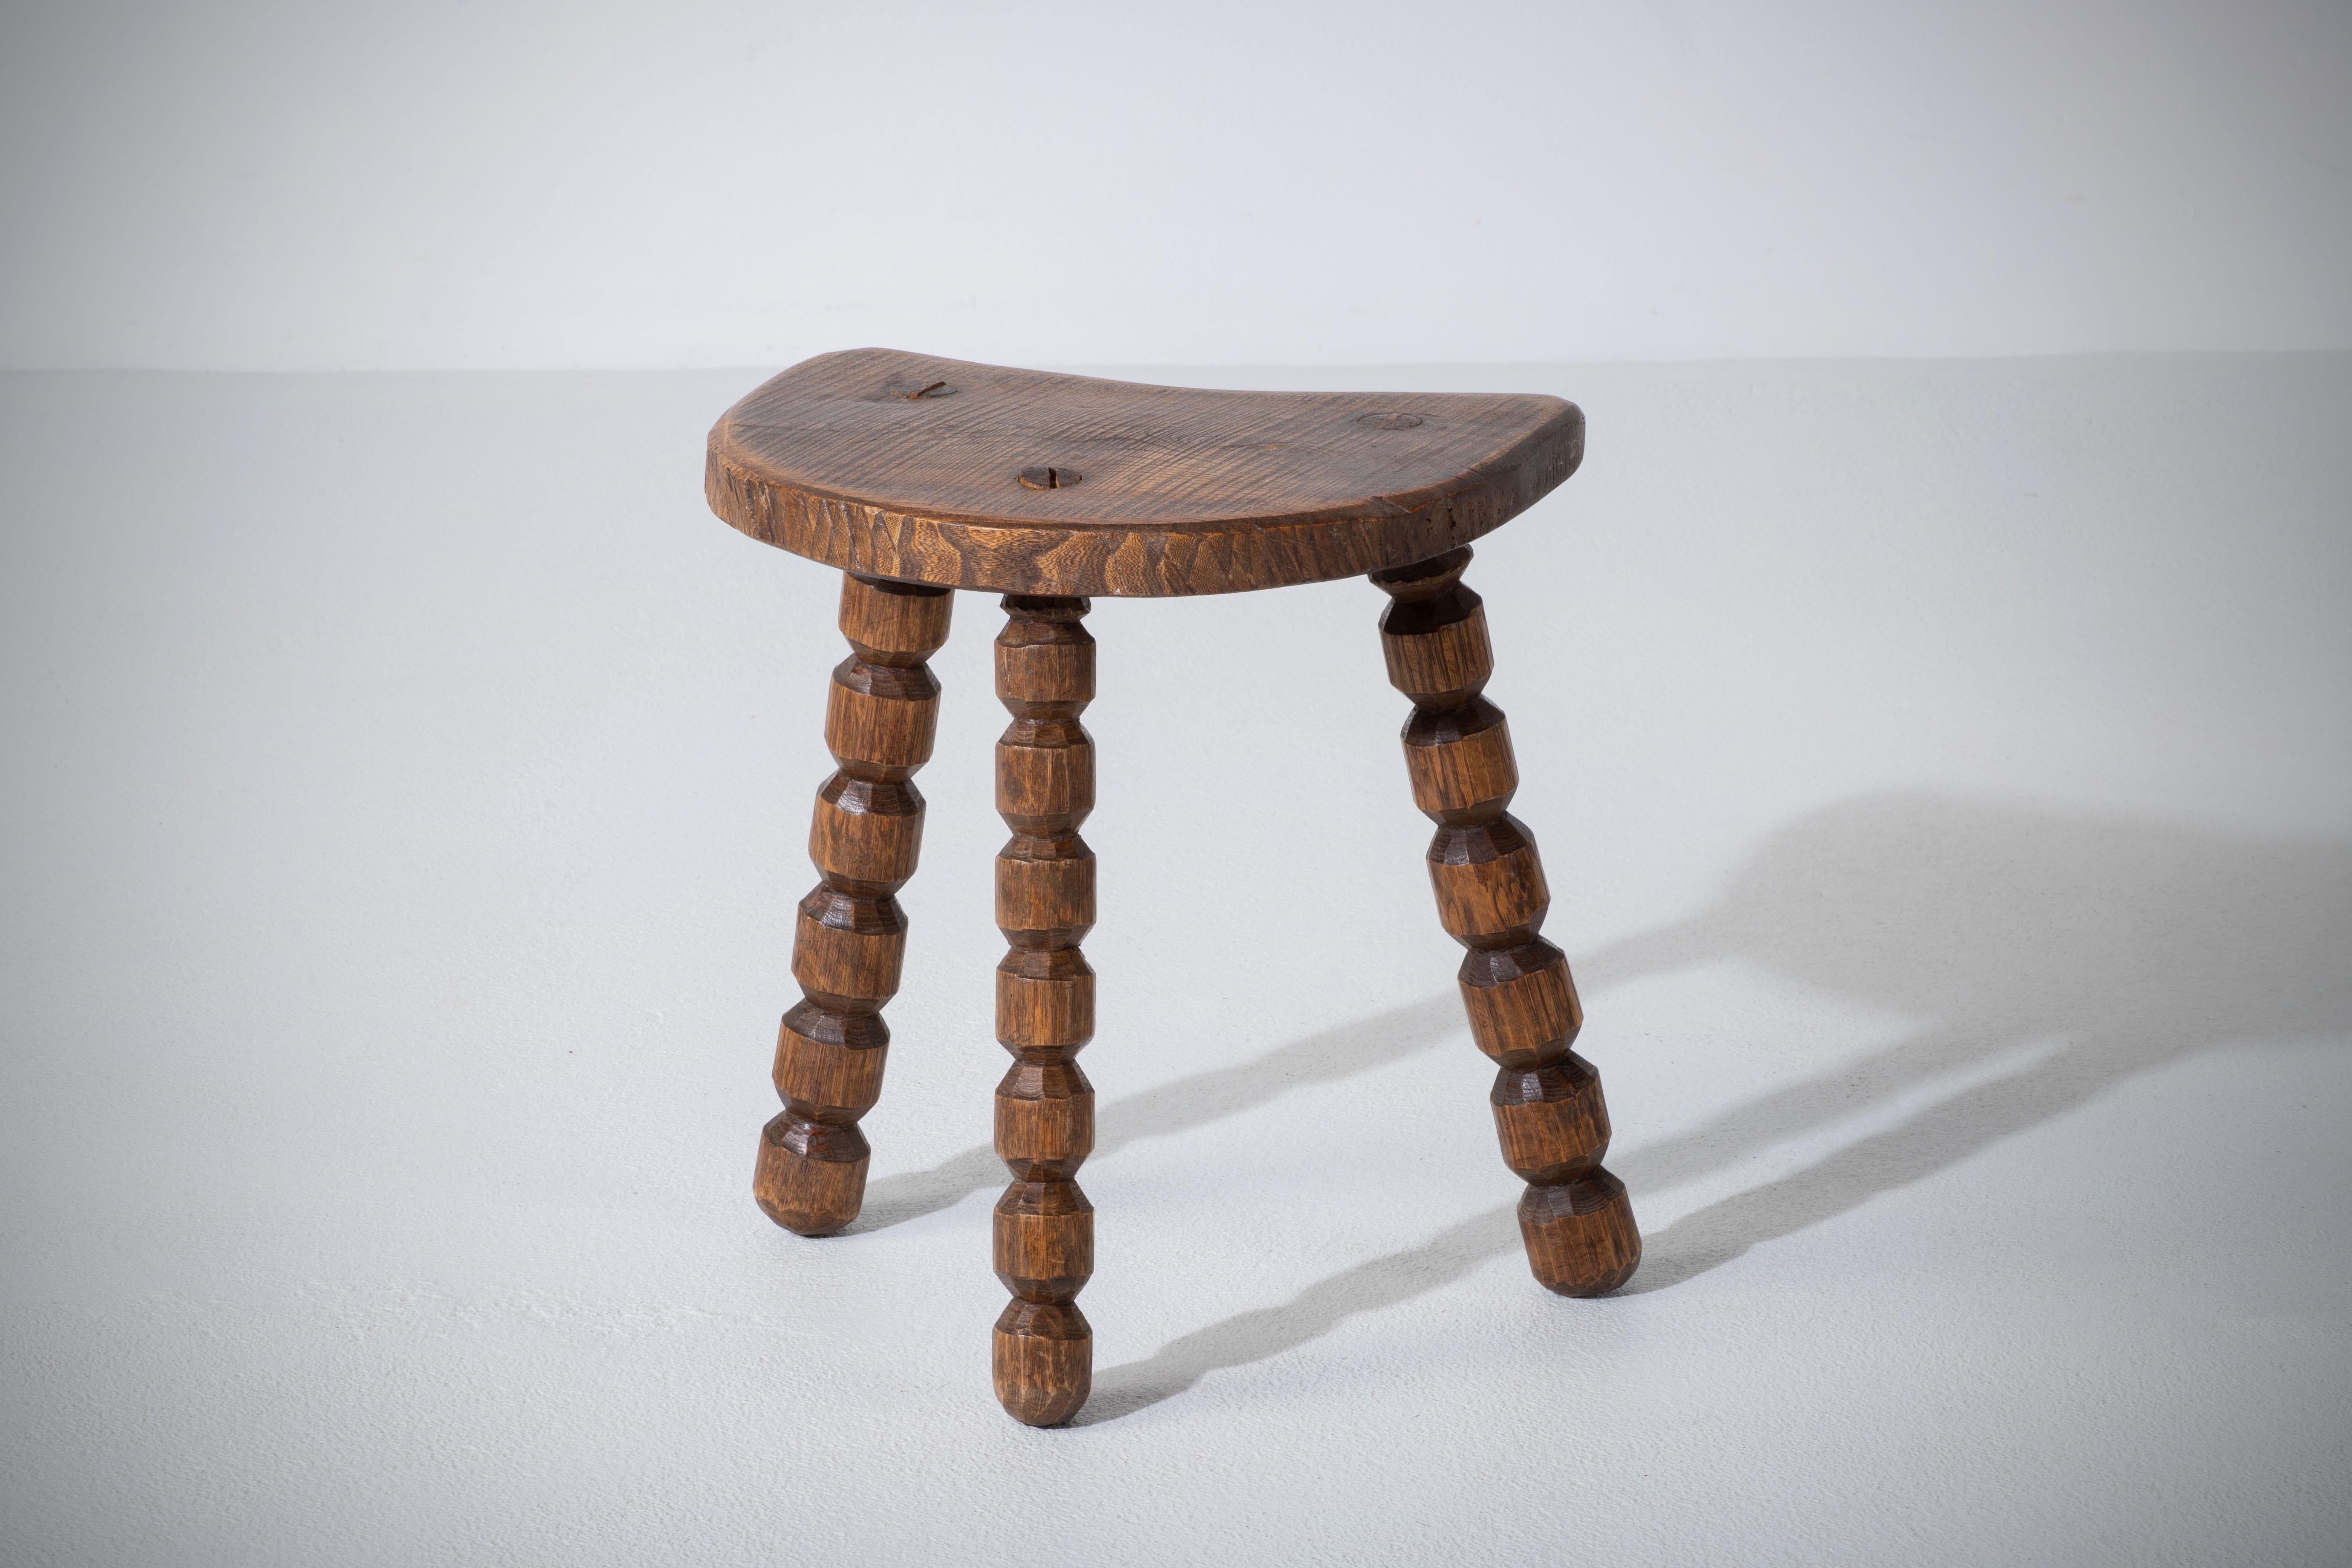 Distinctive wood midcentury stool from France. Made in the 1950s, with no hardware. Lovely primitive look with gouge work.
Good vintage condition.